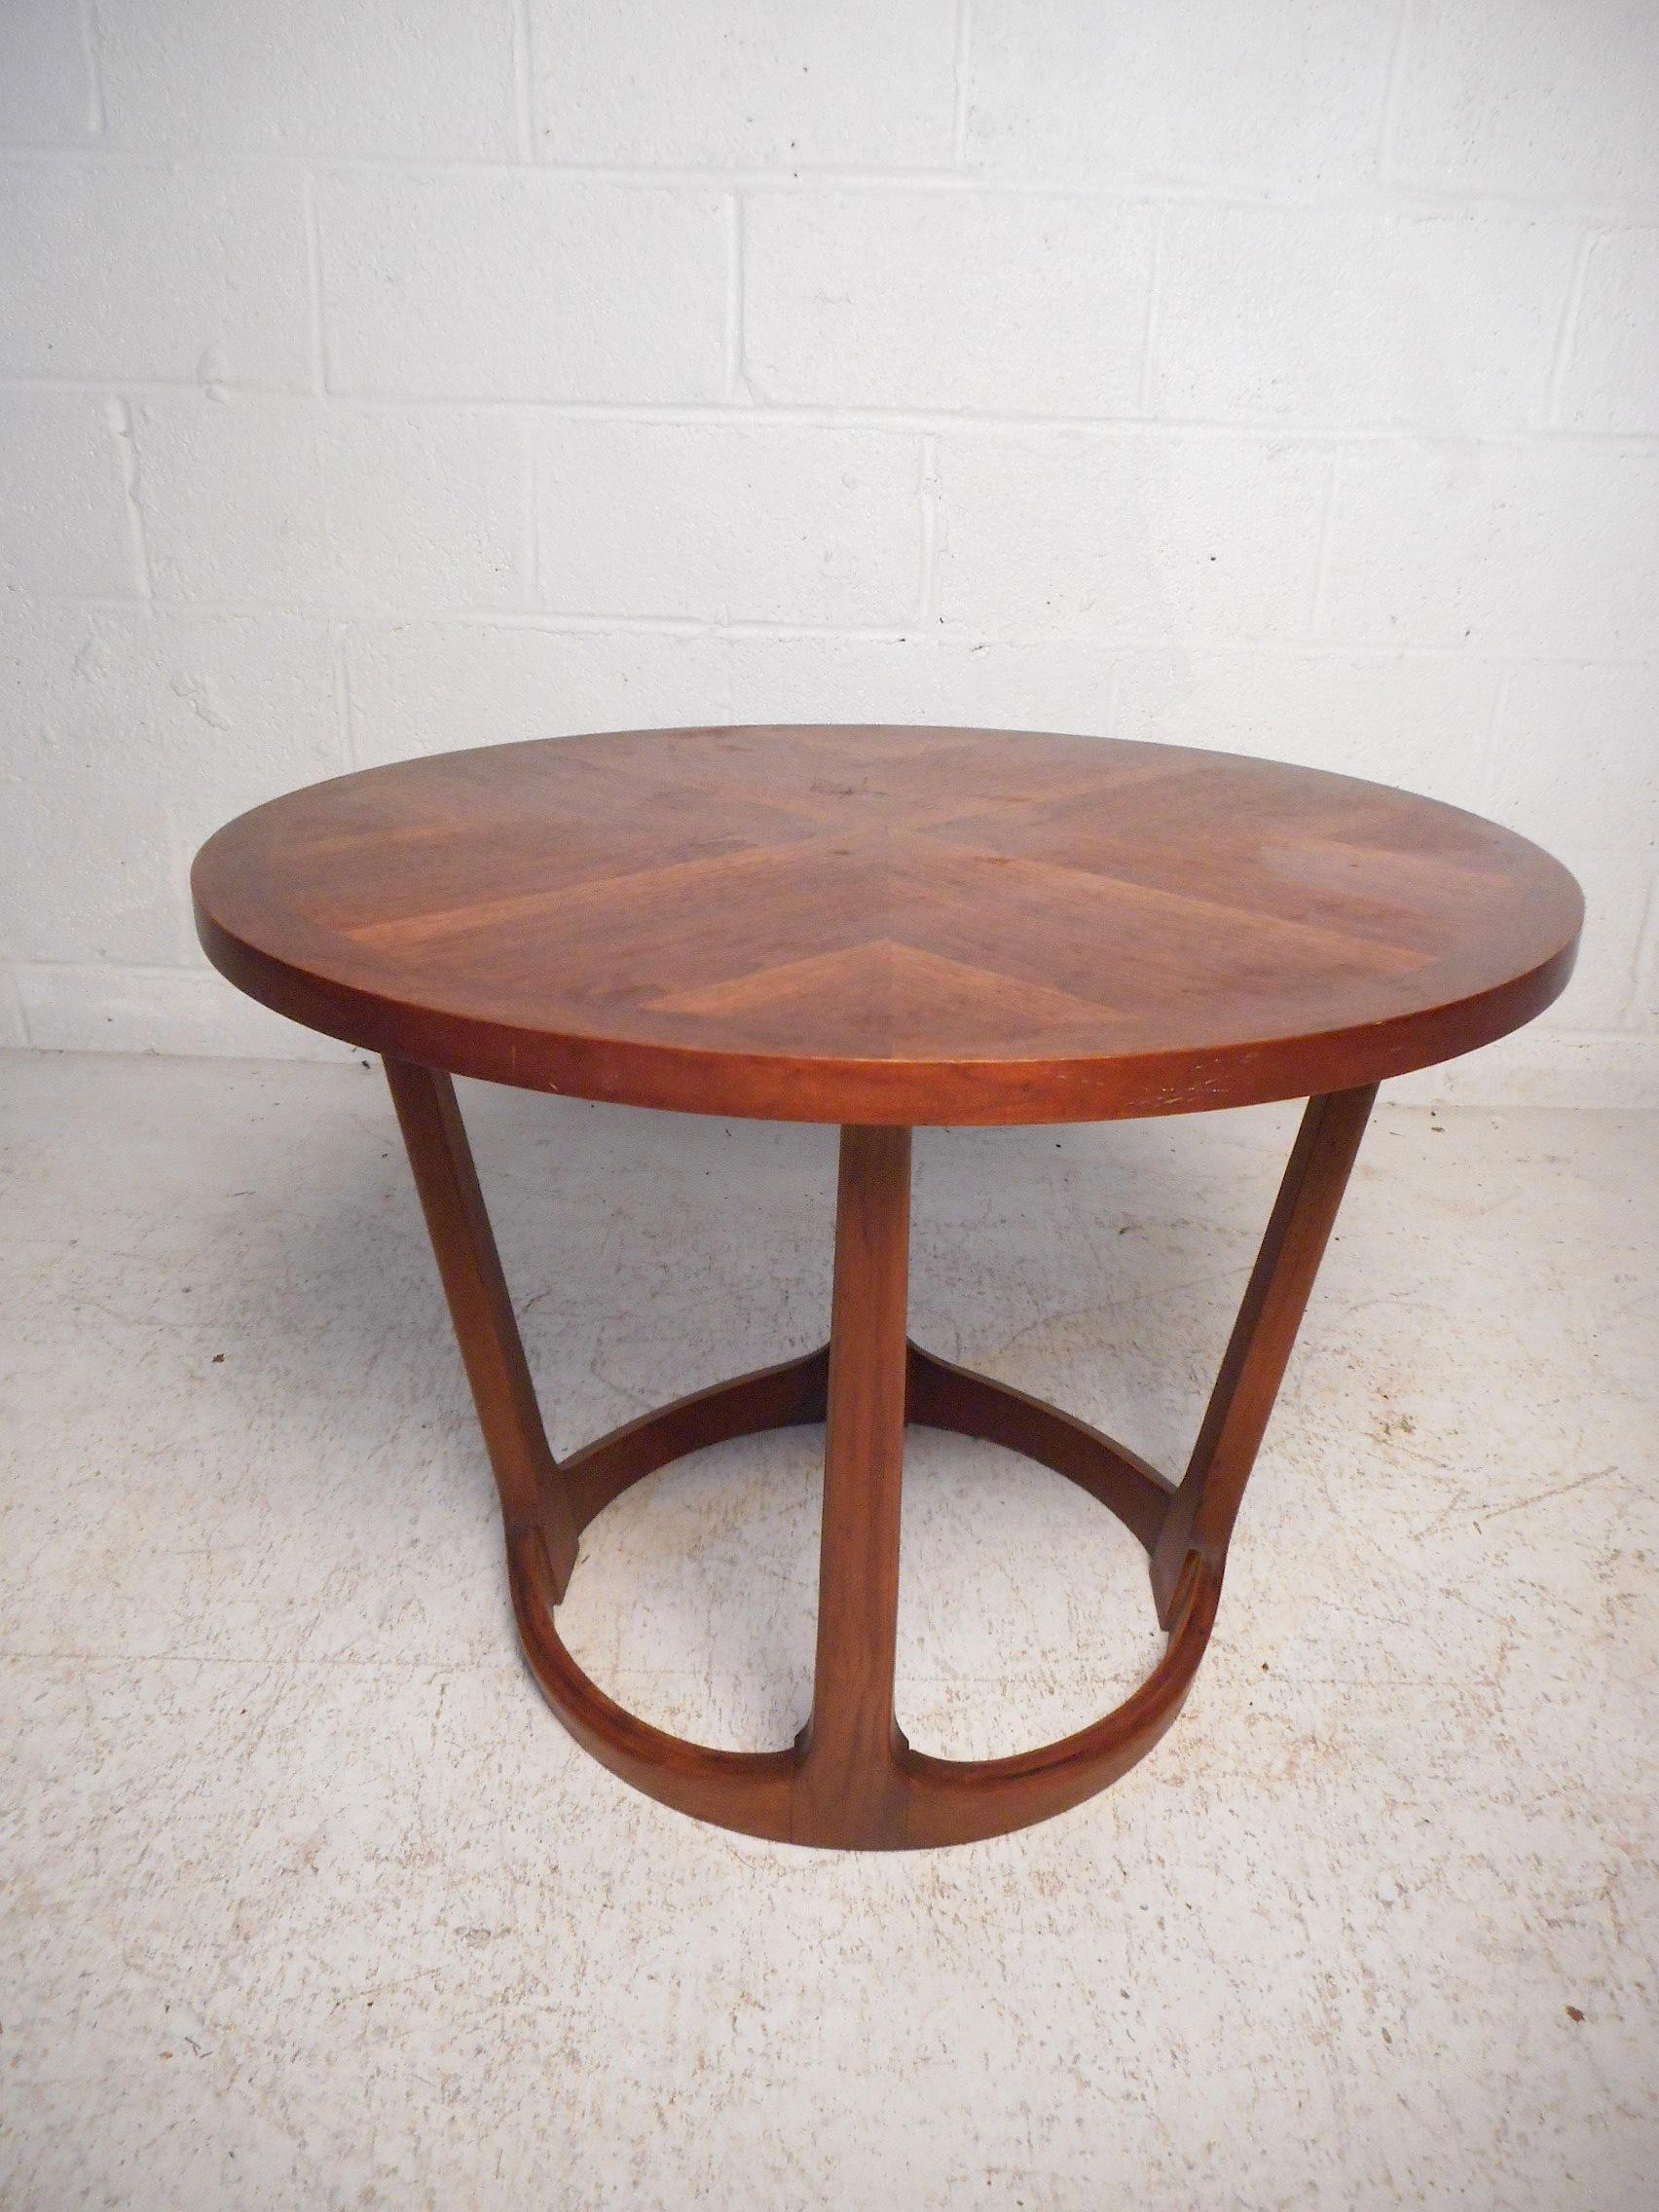 This stylish midcentury side table features a sturdy walnut construction, tapered supports, and a circular tabletop showcasing an interesting grain pattern. Made by Lane in 1964, this table is sure to make a great addition to any modern interior.